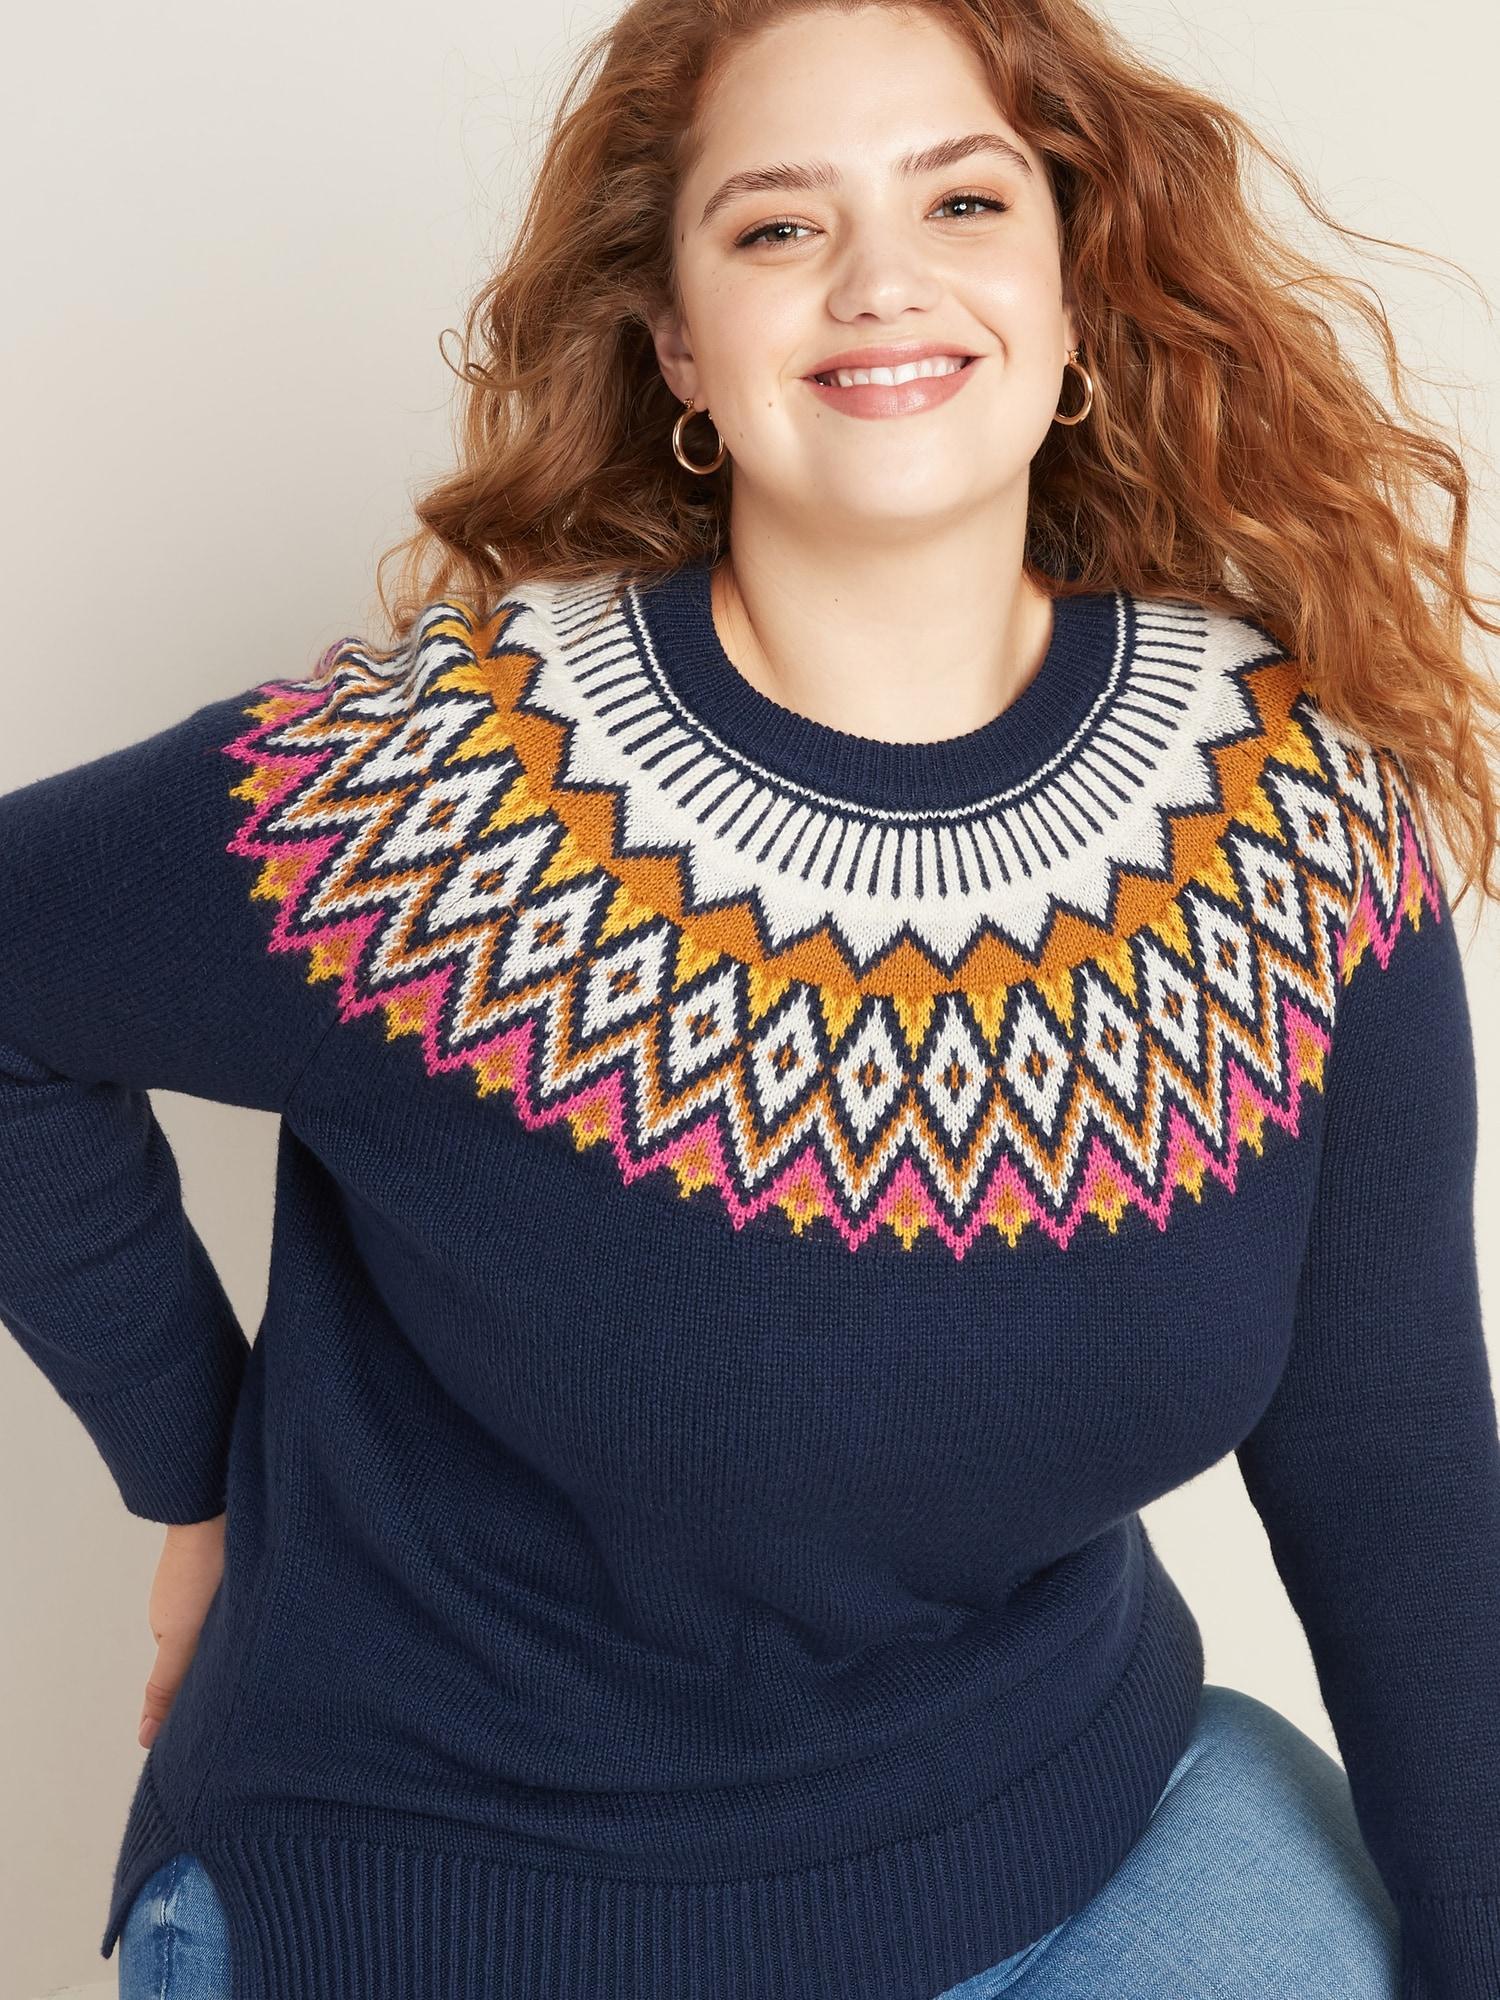 Download Old Navy Cotton Plus-size Fair Isle Crew-neck Sweater in ...